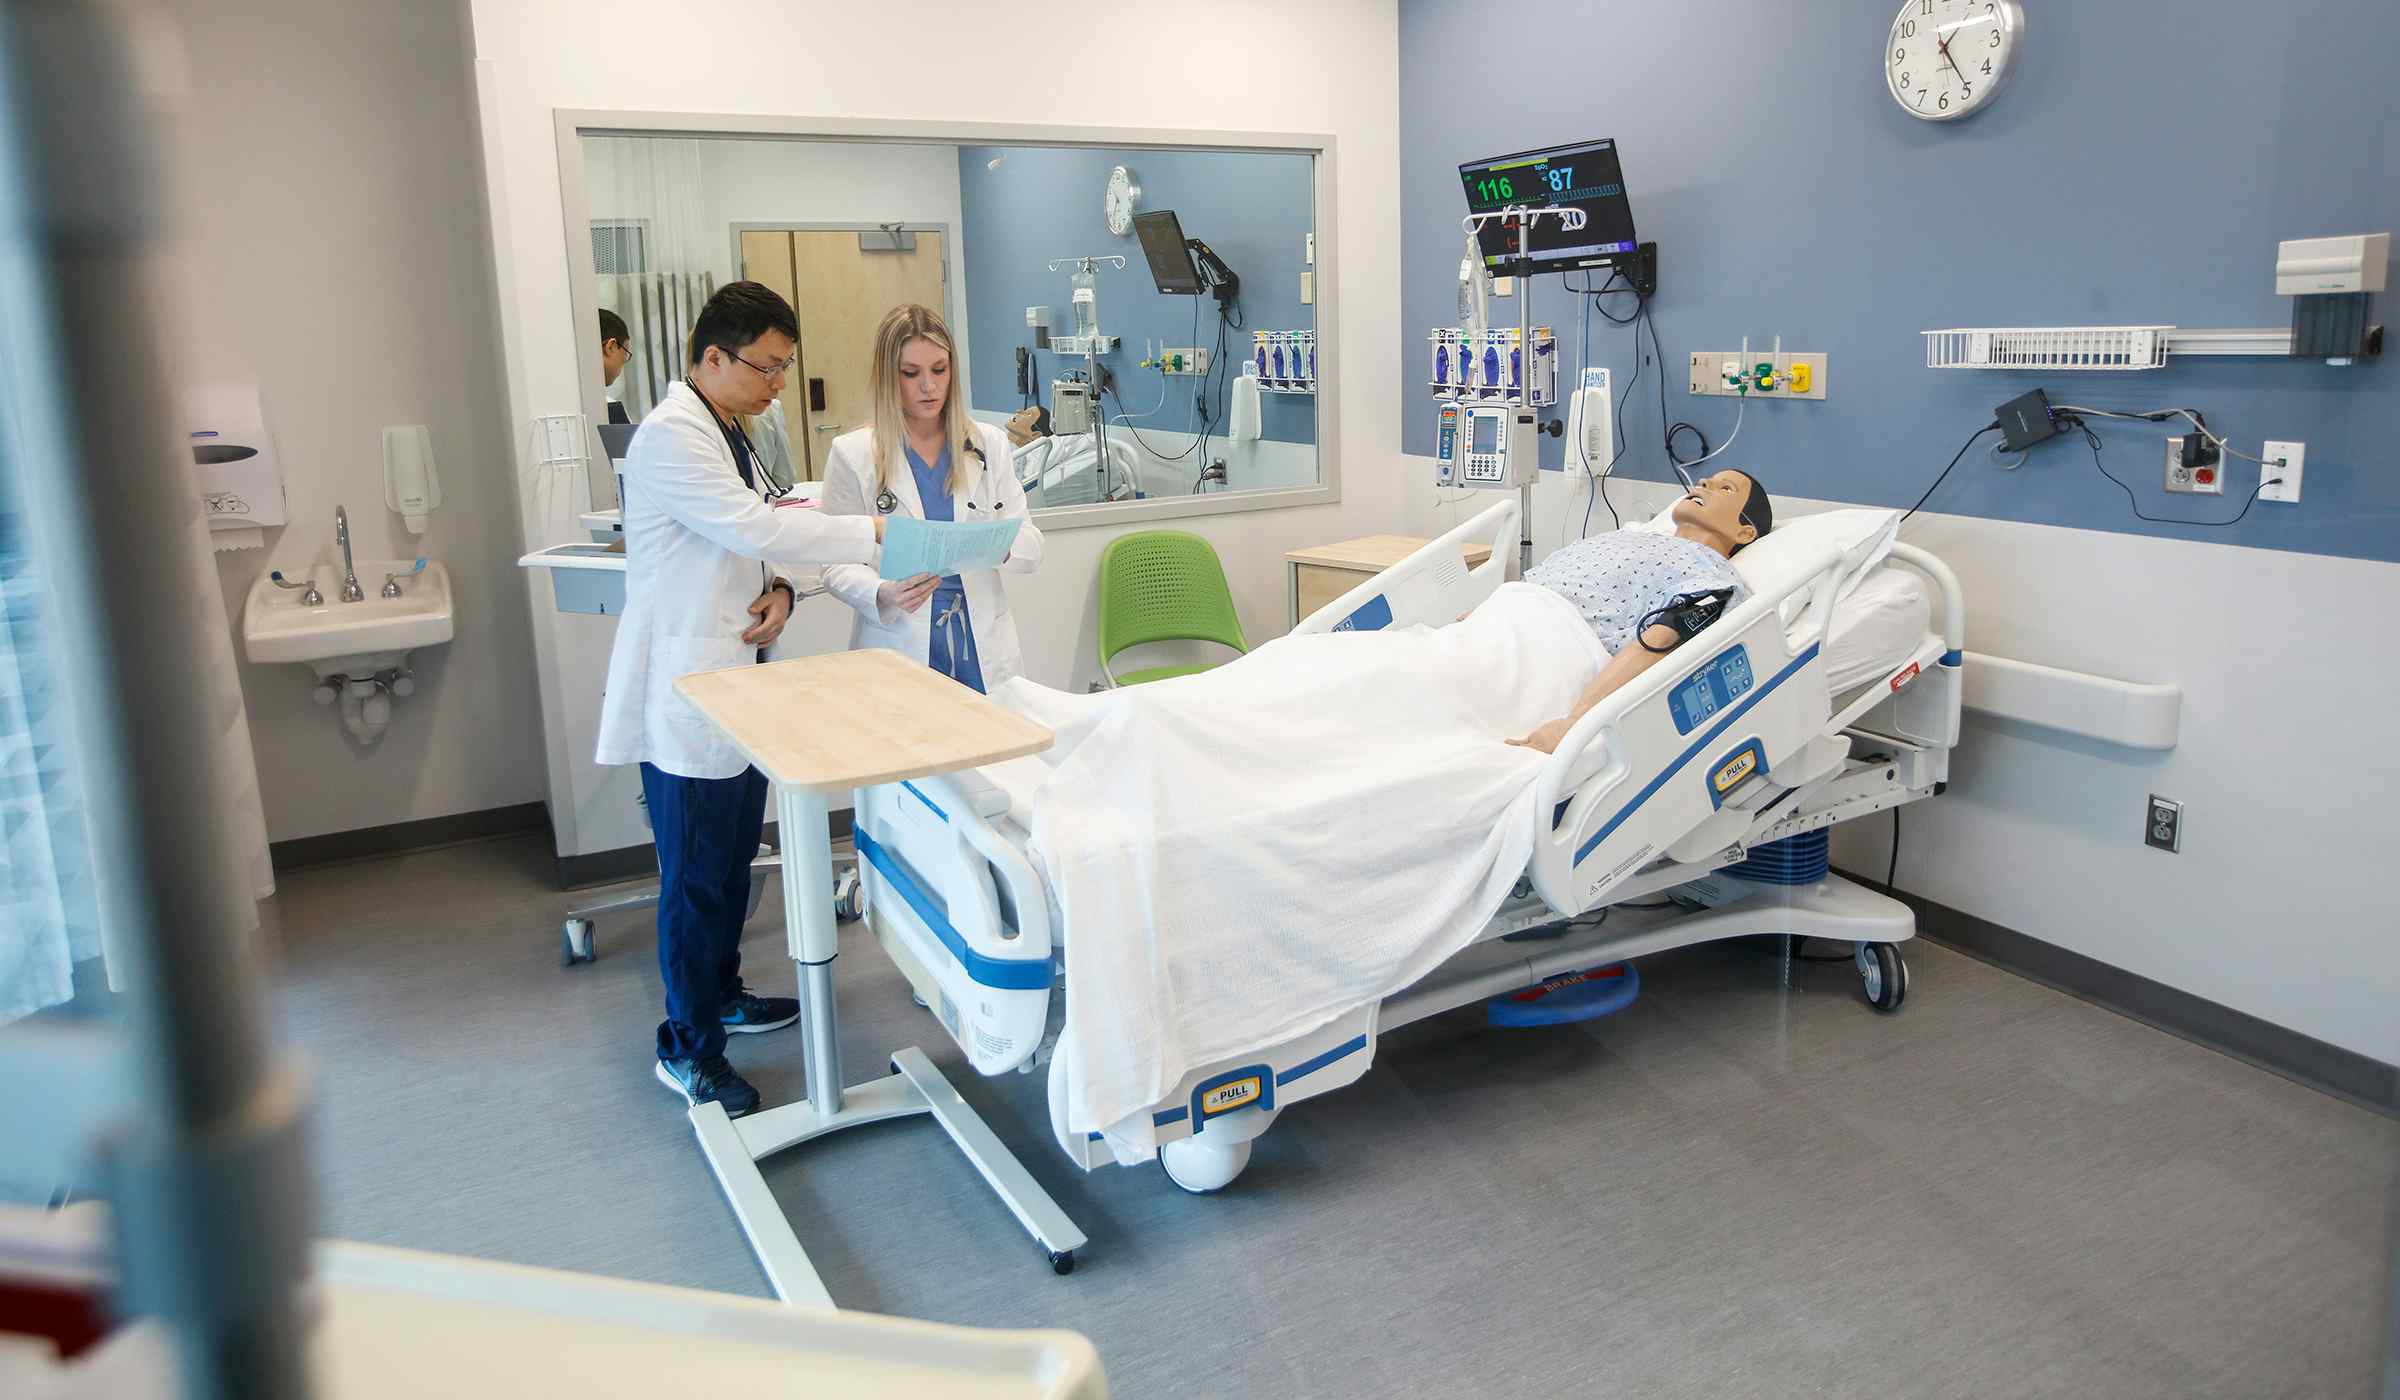 Accelerated Master's in Nursing students in simulation lab